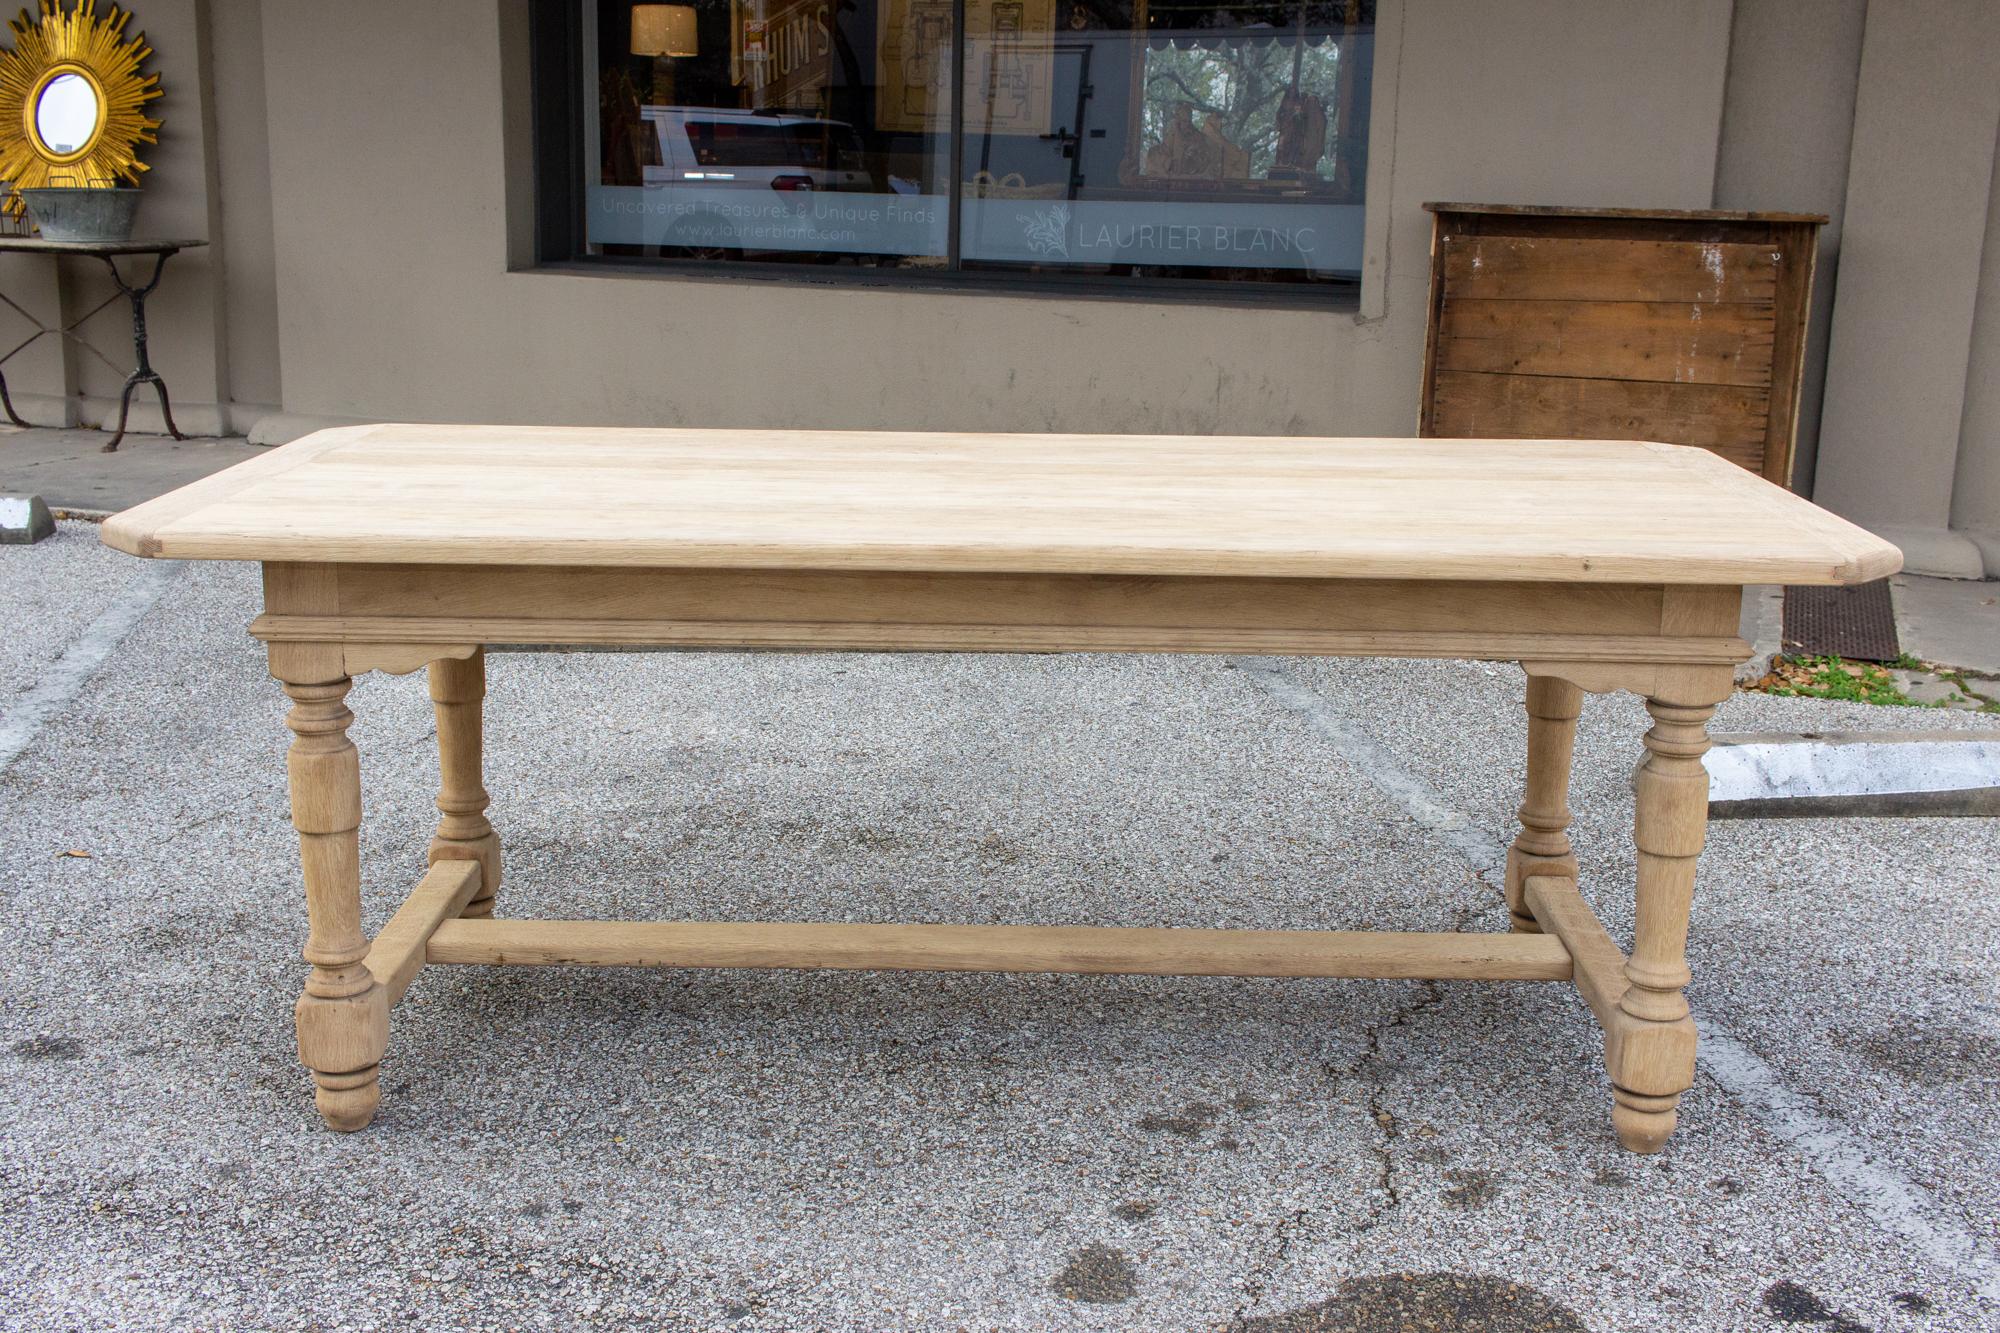 This antique French oak table has turned details in the legs, with hand carved accents in the apron and an I-shaped stretcher at the base. There are carved details in the apron, where the legs meet, at each corner. The top itself has a rounded edge